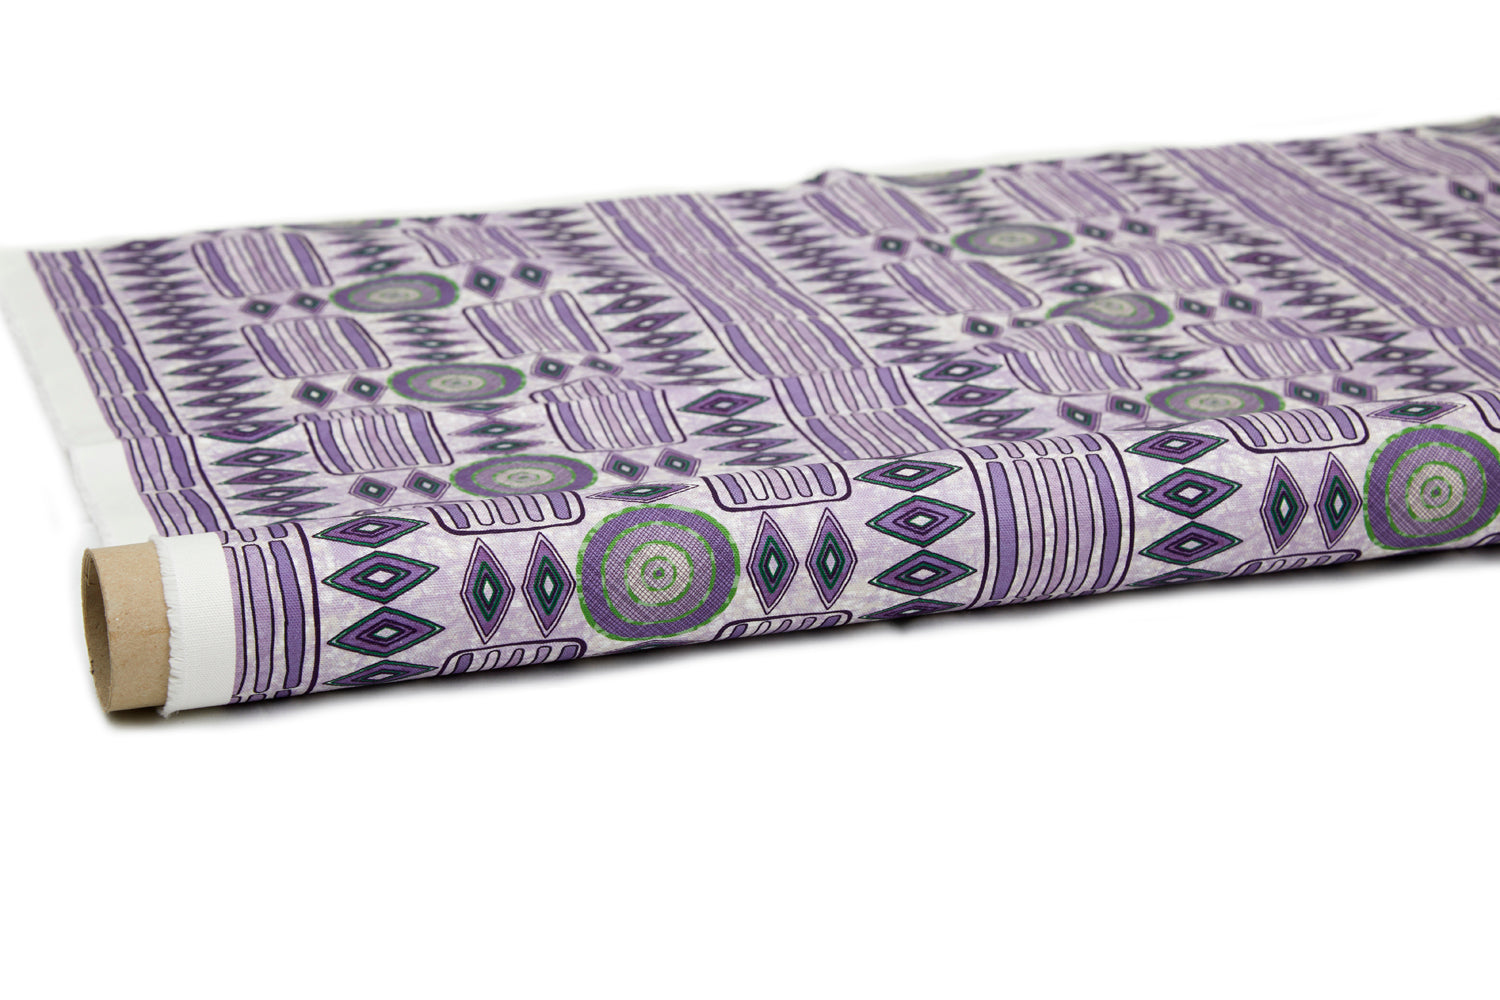 Partially unrolled fabric in a playful geometric stripe print in shades of purple with green accents.